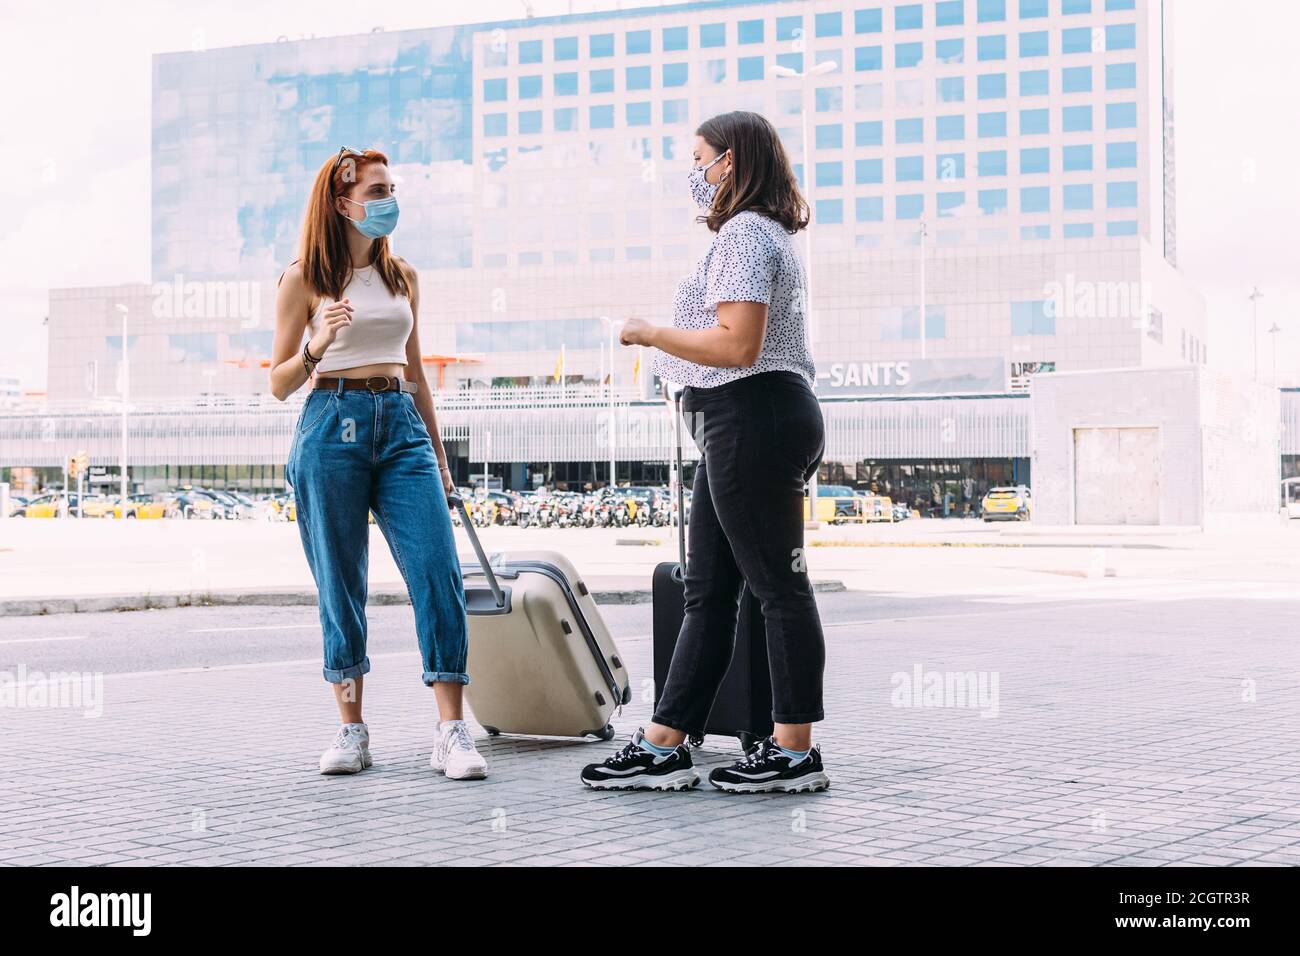 two tourists wearing face masks converse while keeping a safe distance due to covid-19 Stock Photo